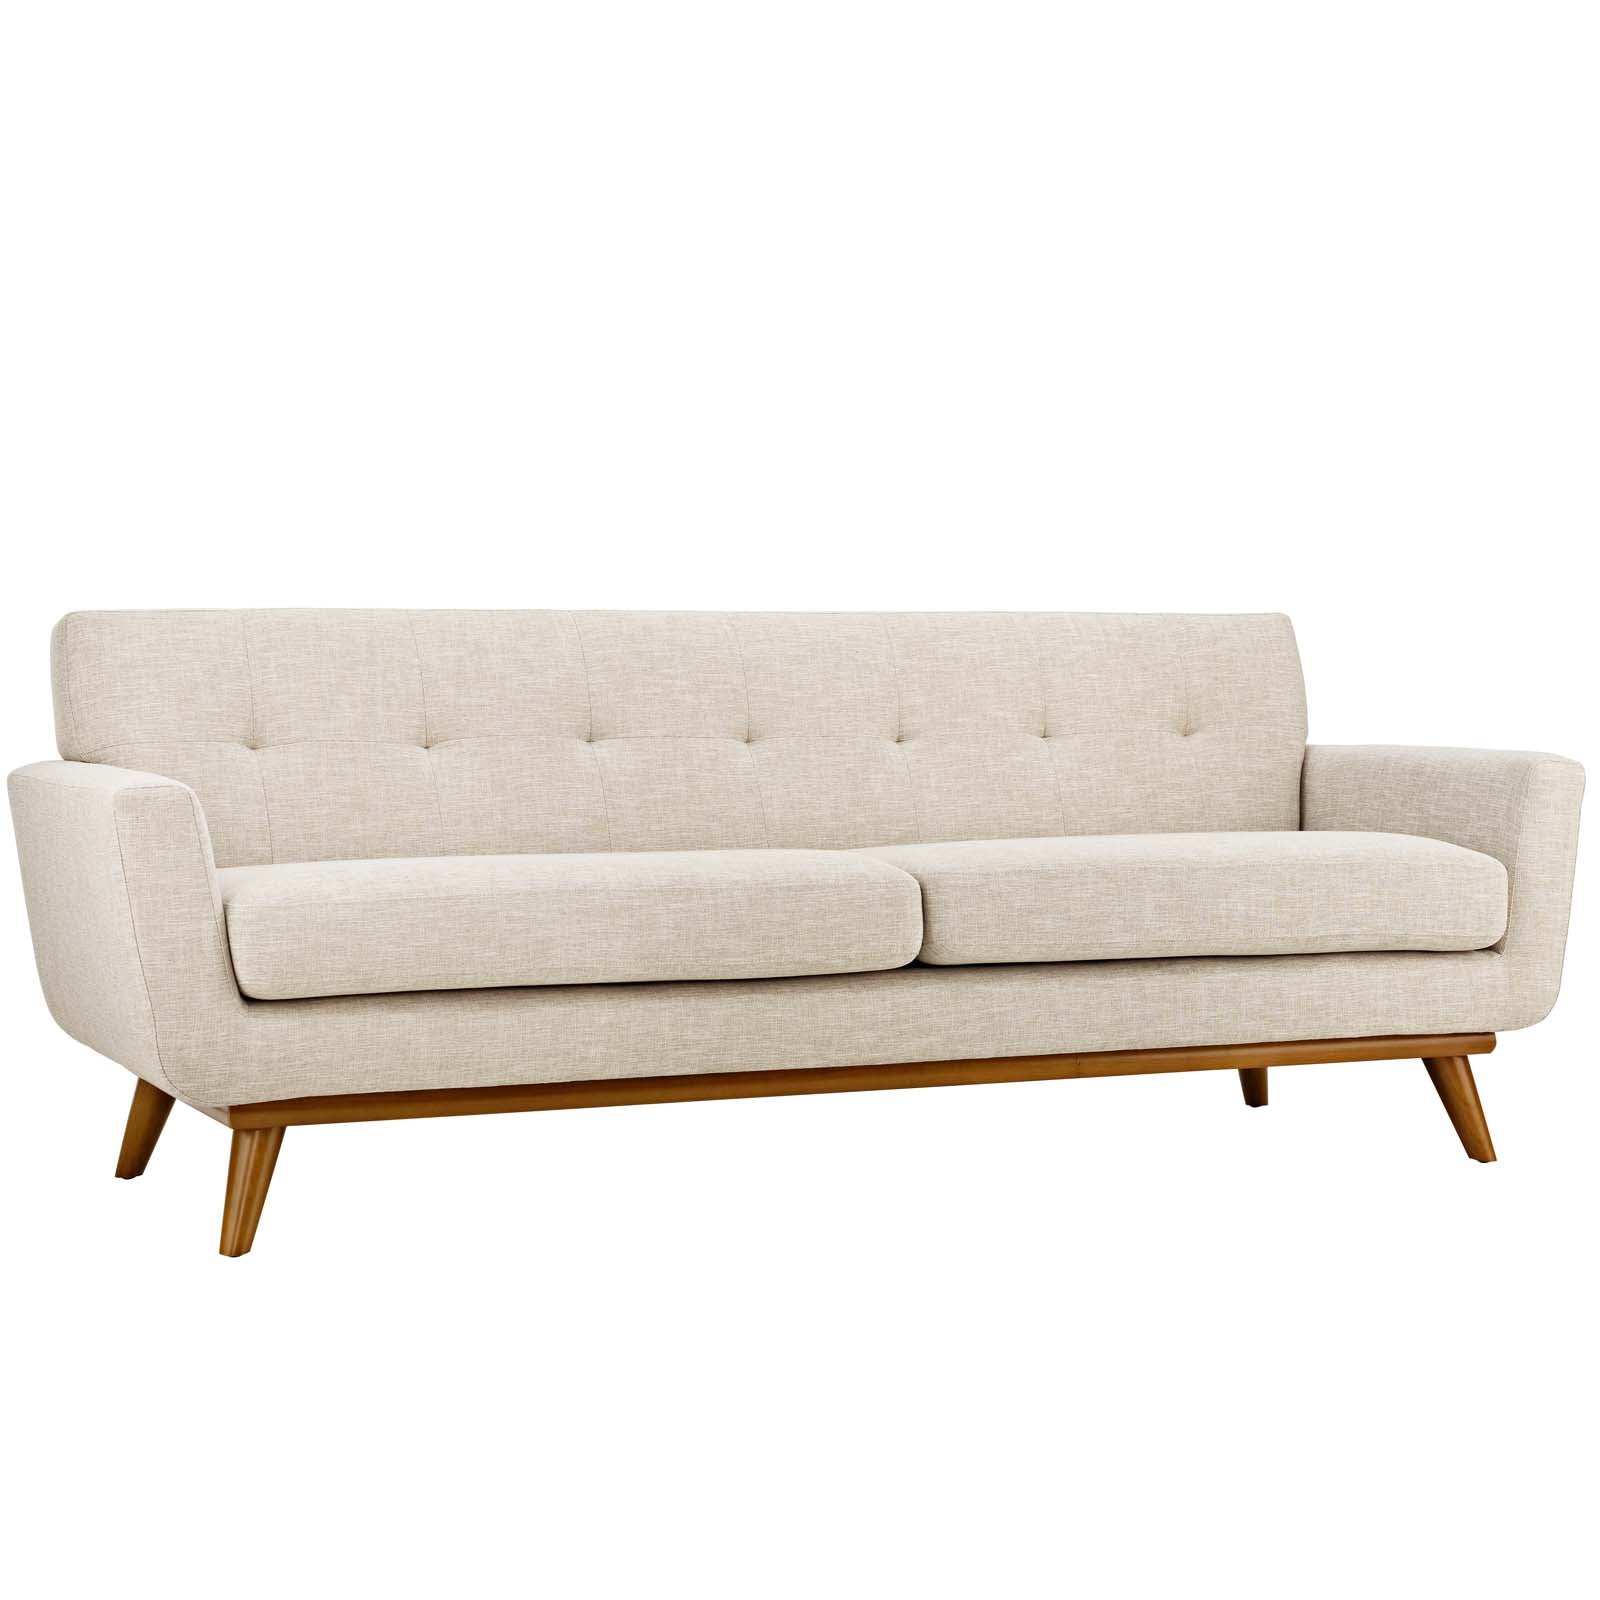 Modway Sofas & Couches - Engage Upholstered Fabric Sofa Beige